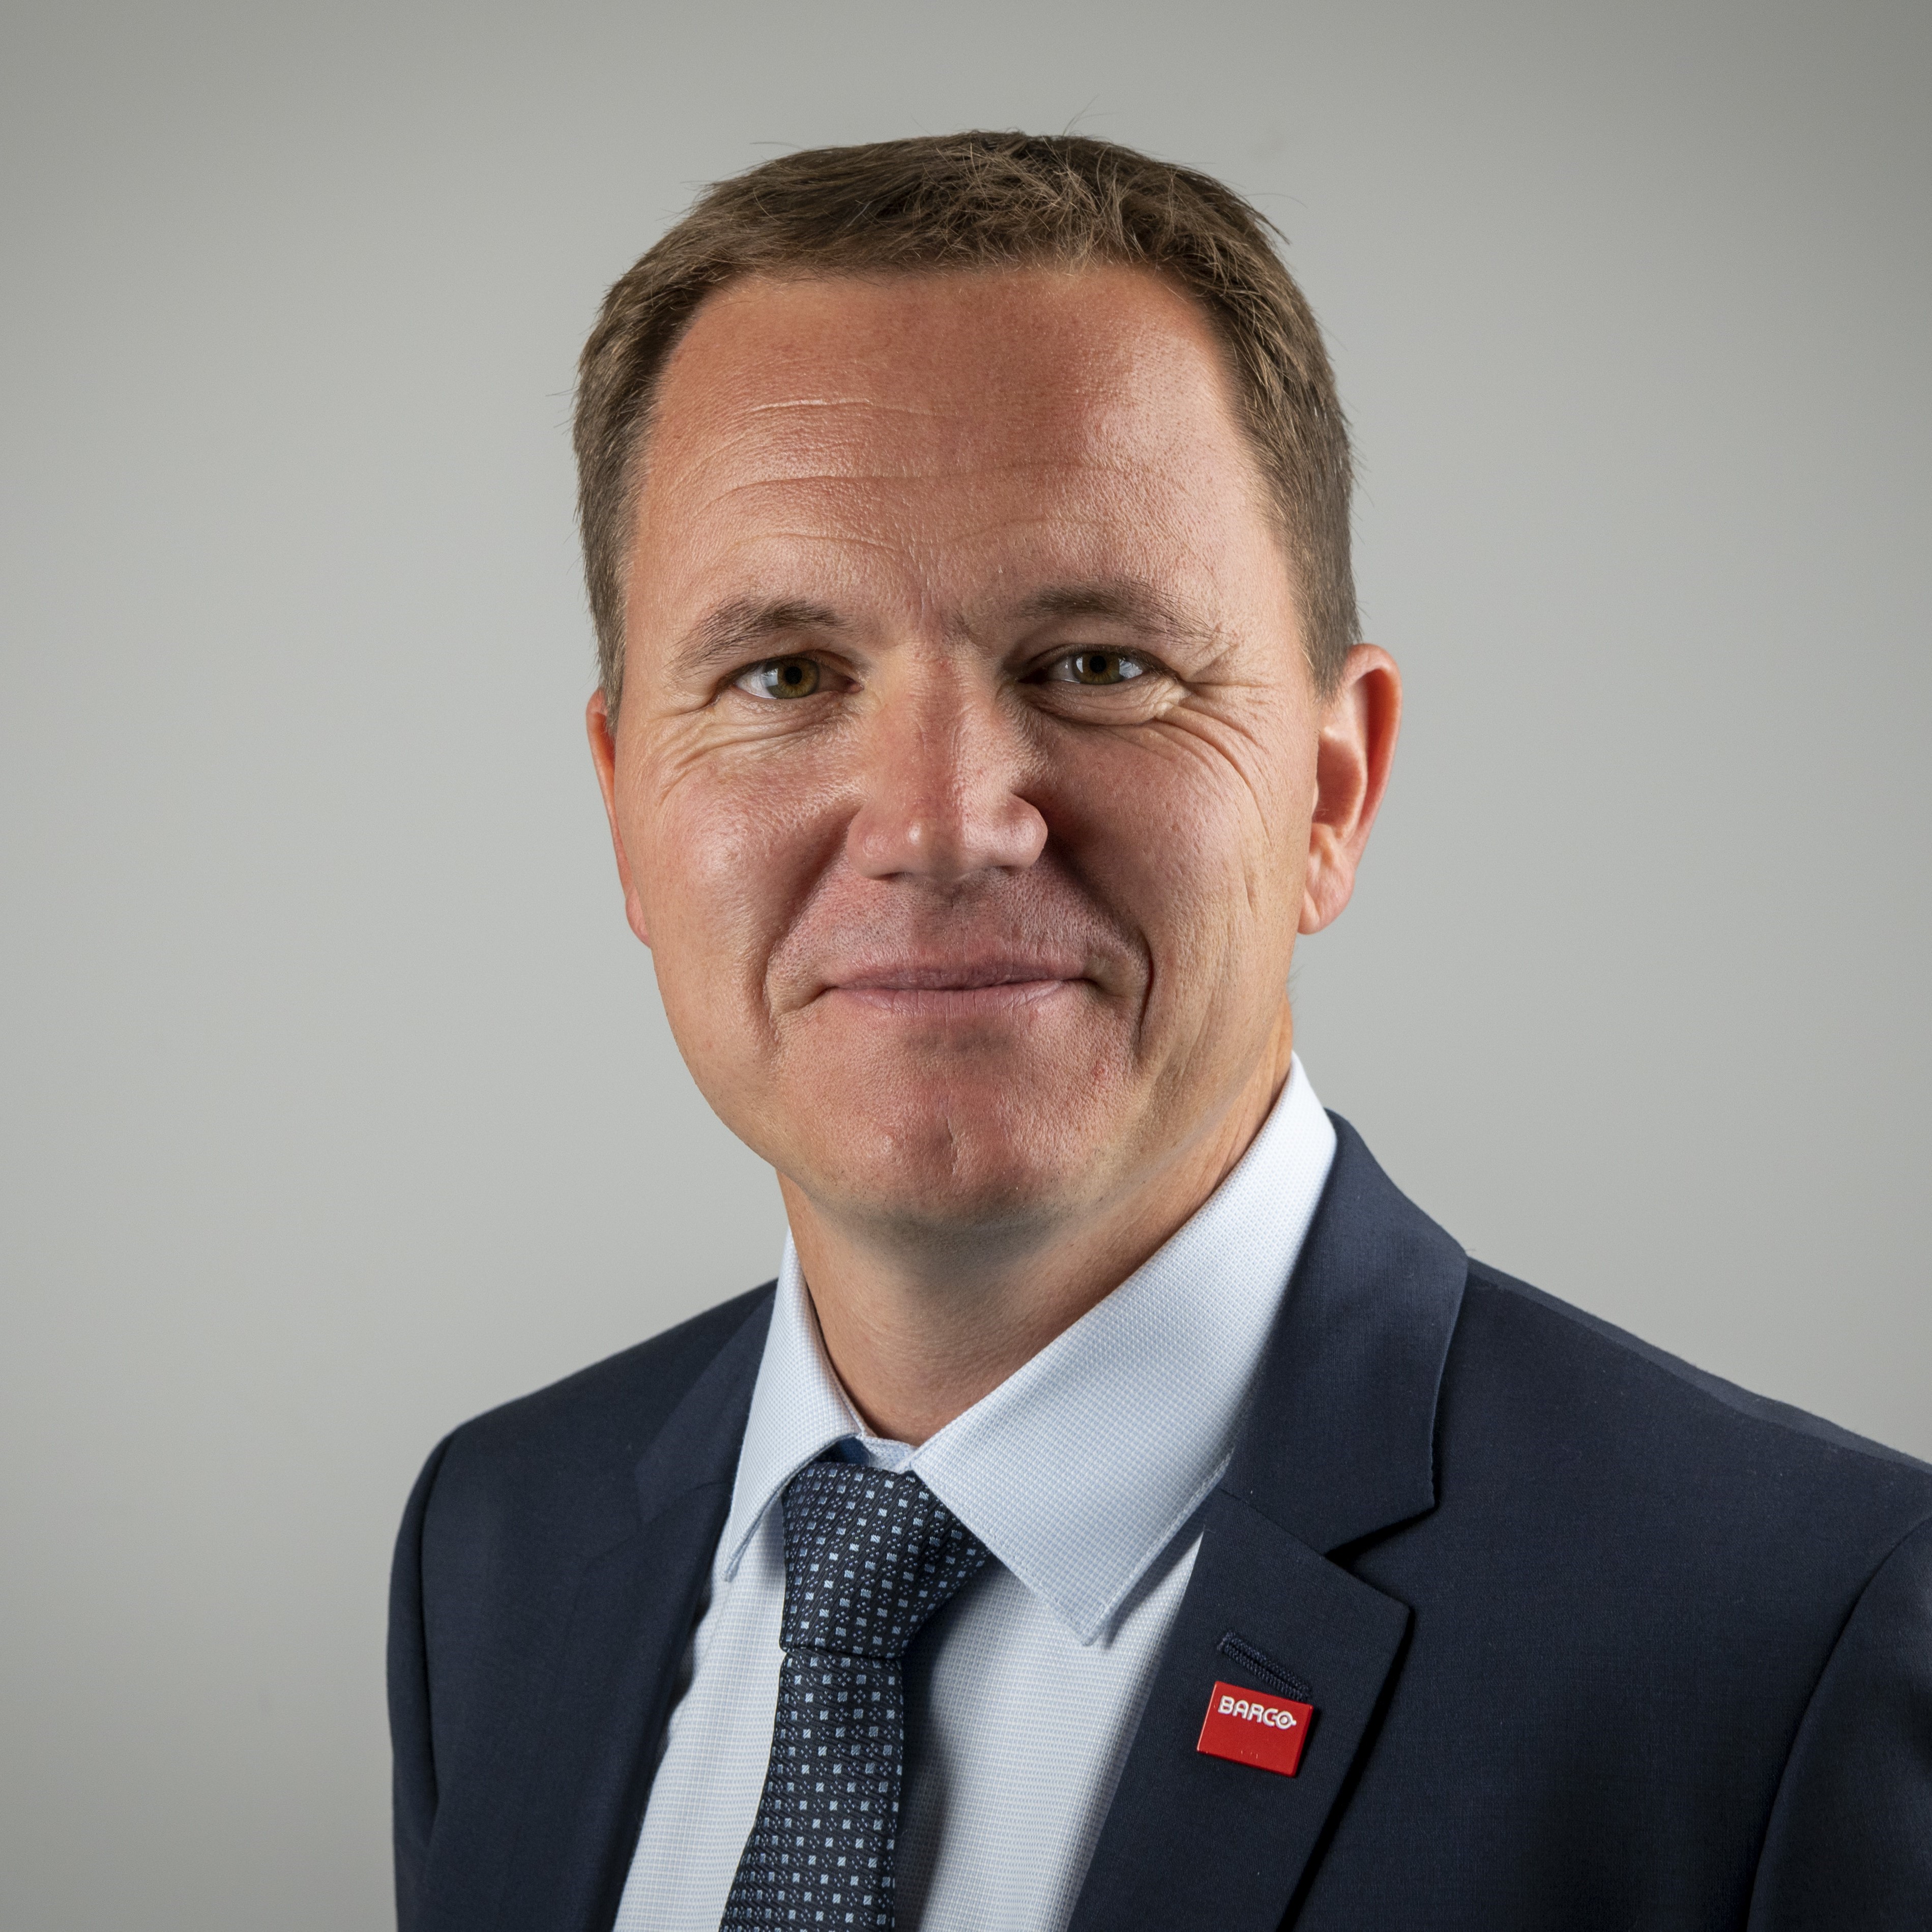 Willem Fransoo, director of investor relations at Barco